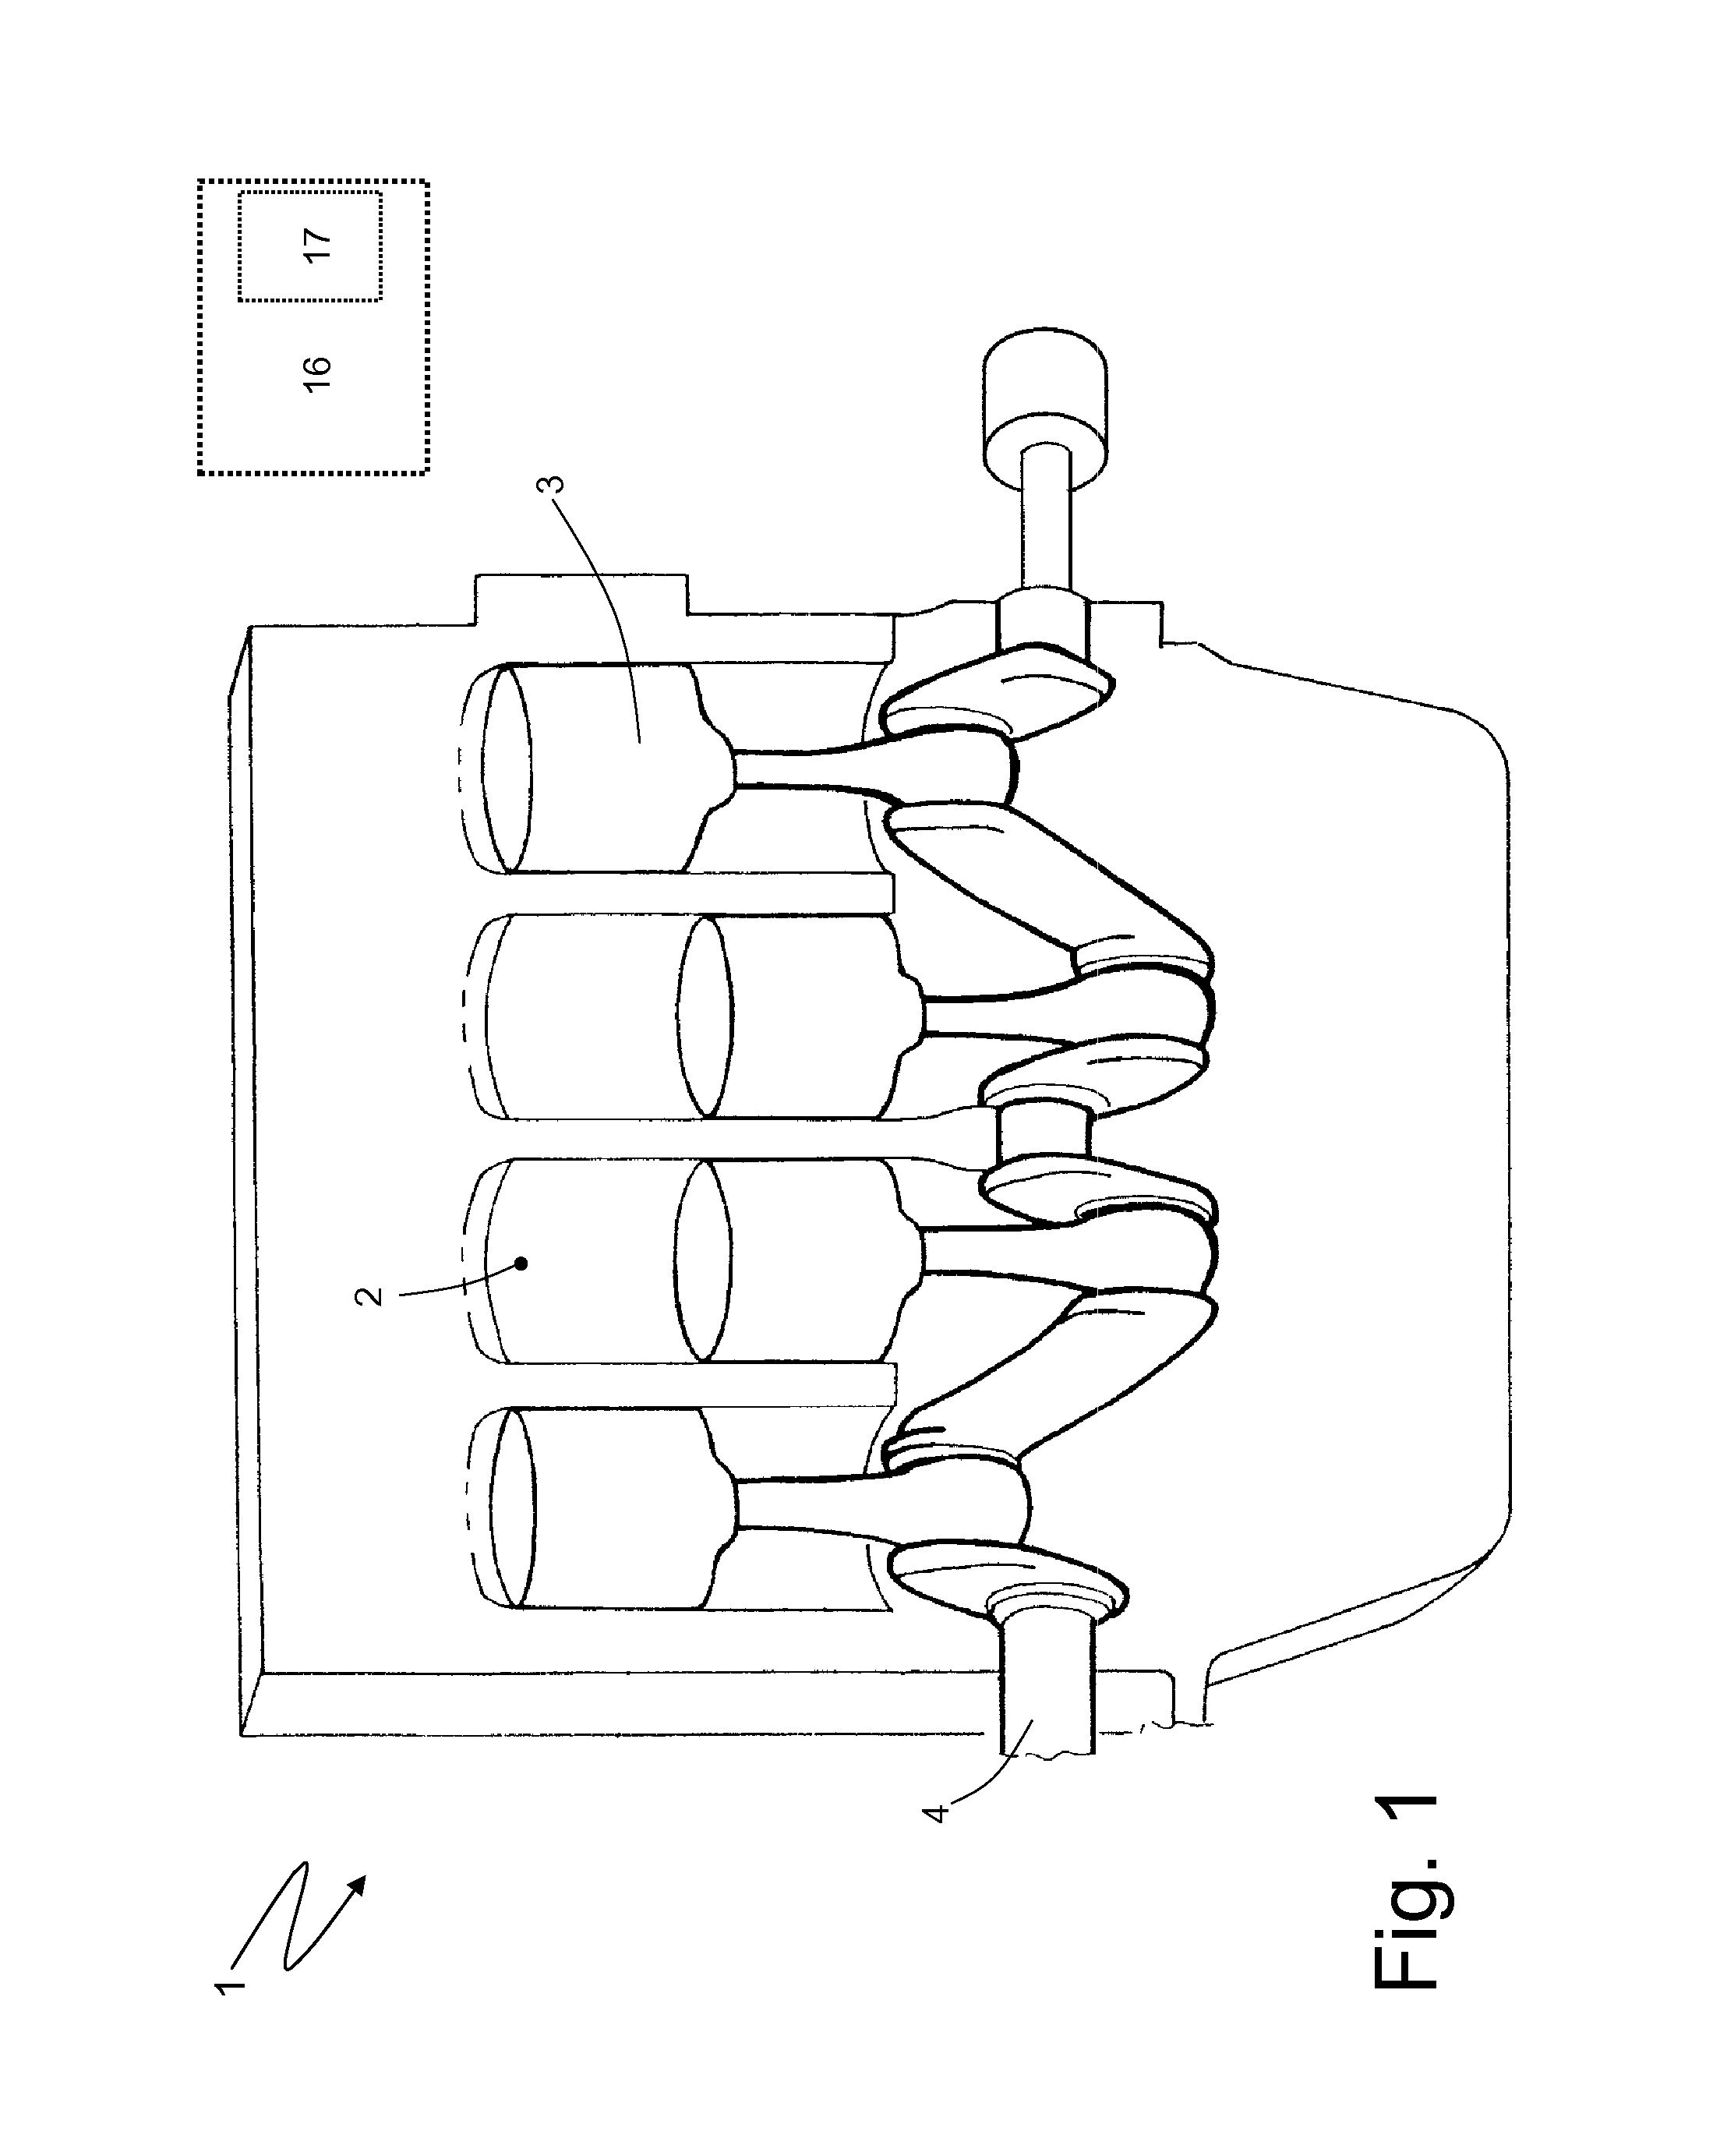 Method of controlling knocking in an internal combustion engine equipped with a device for controlling the opening of inlet valves